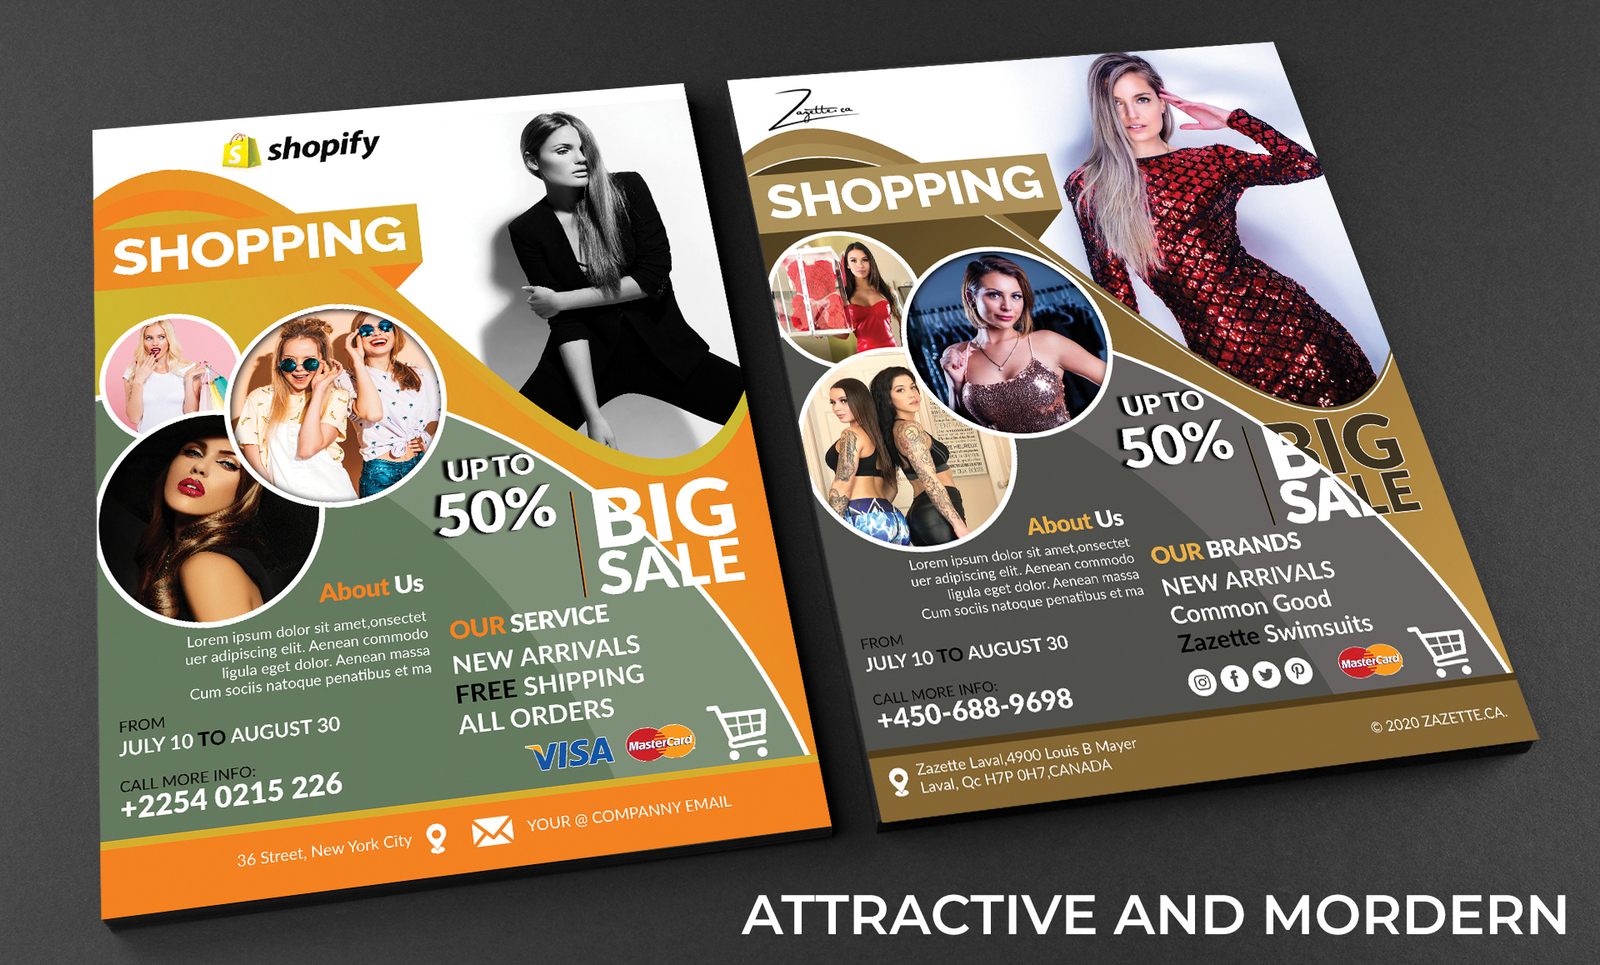 The Attractive Flyer Design by Md. Najmur Rahman on Dribbble